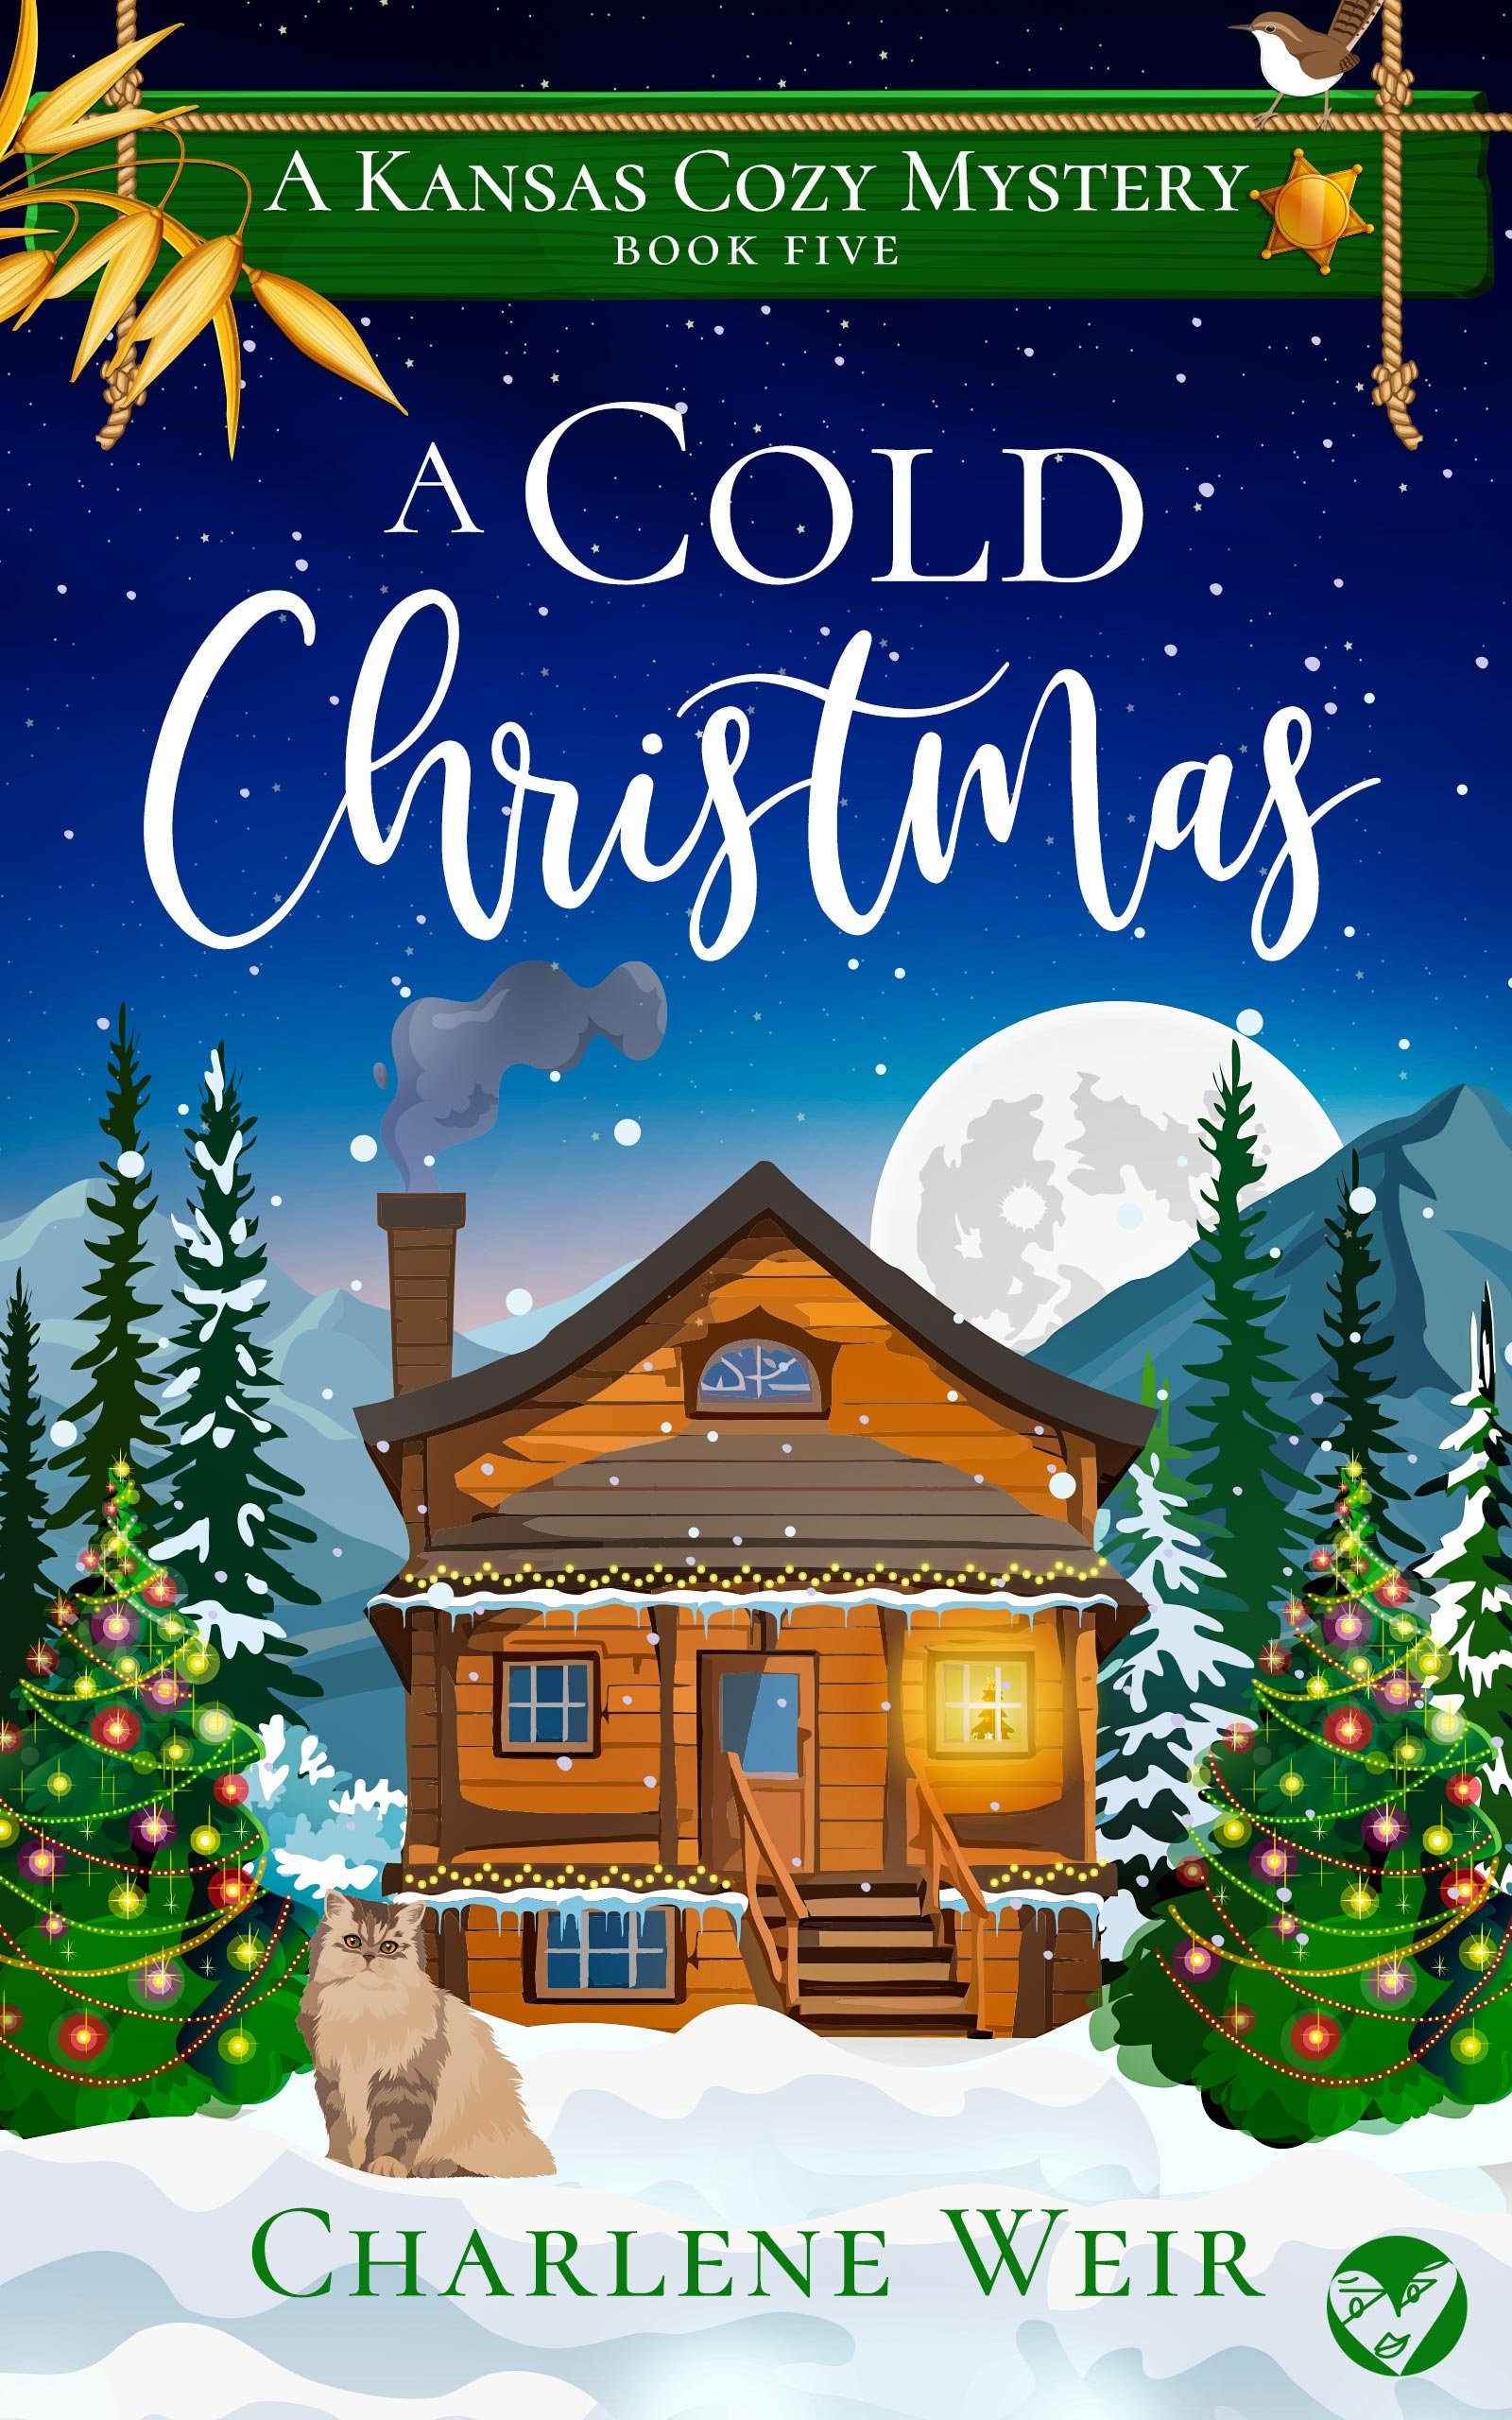 A COLD CHRISTMAS 560k cover publish.jpg